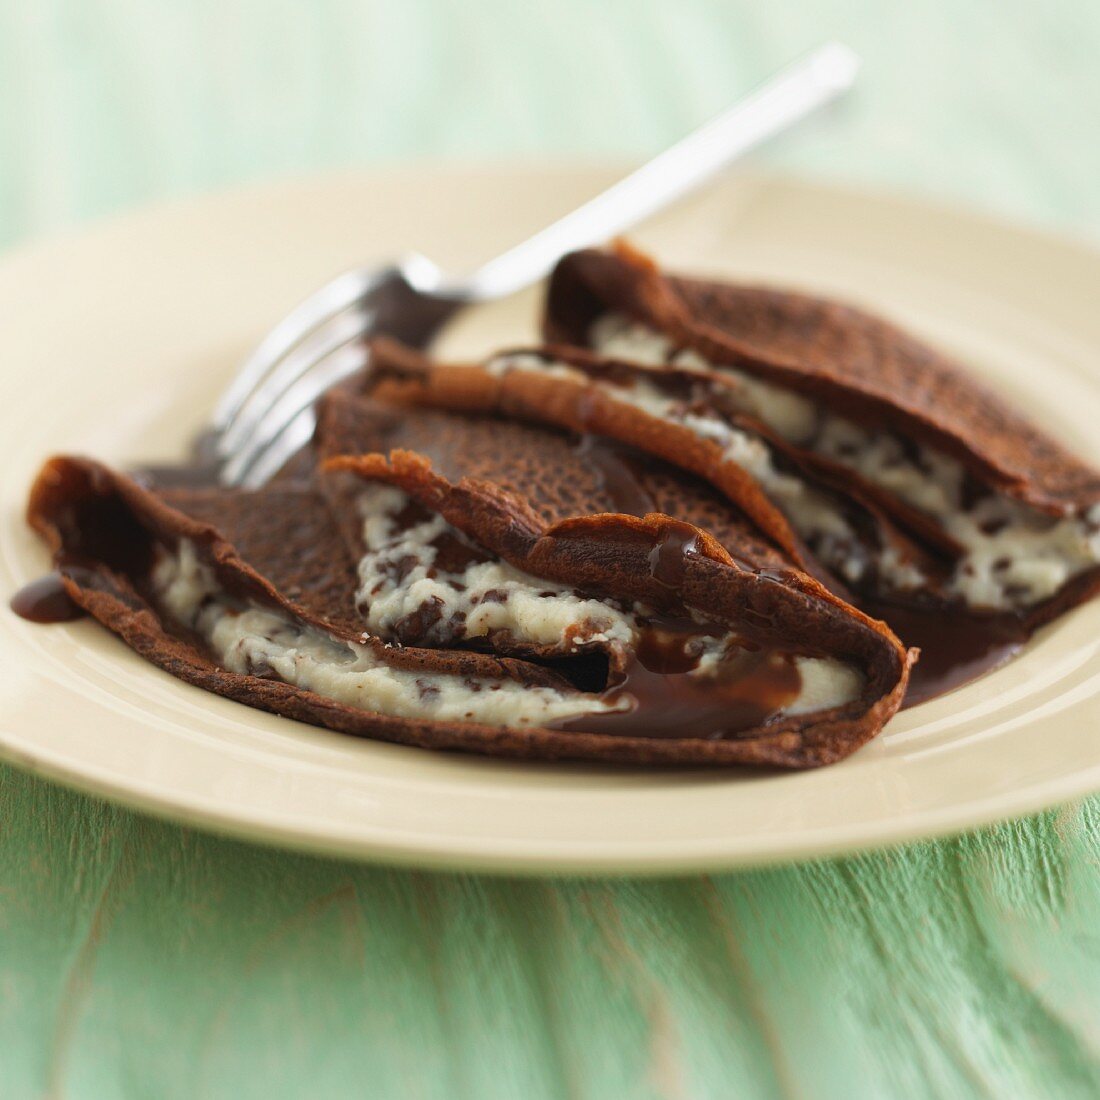 Chocolate crepes with cream filling